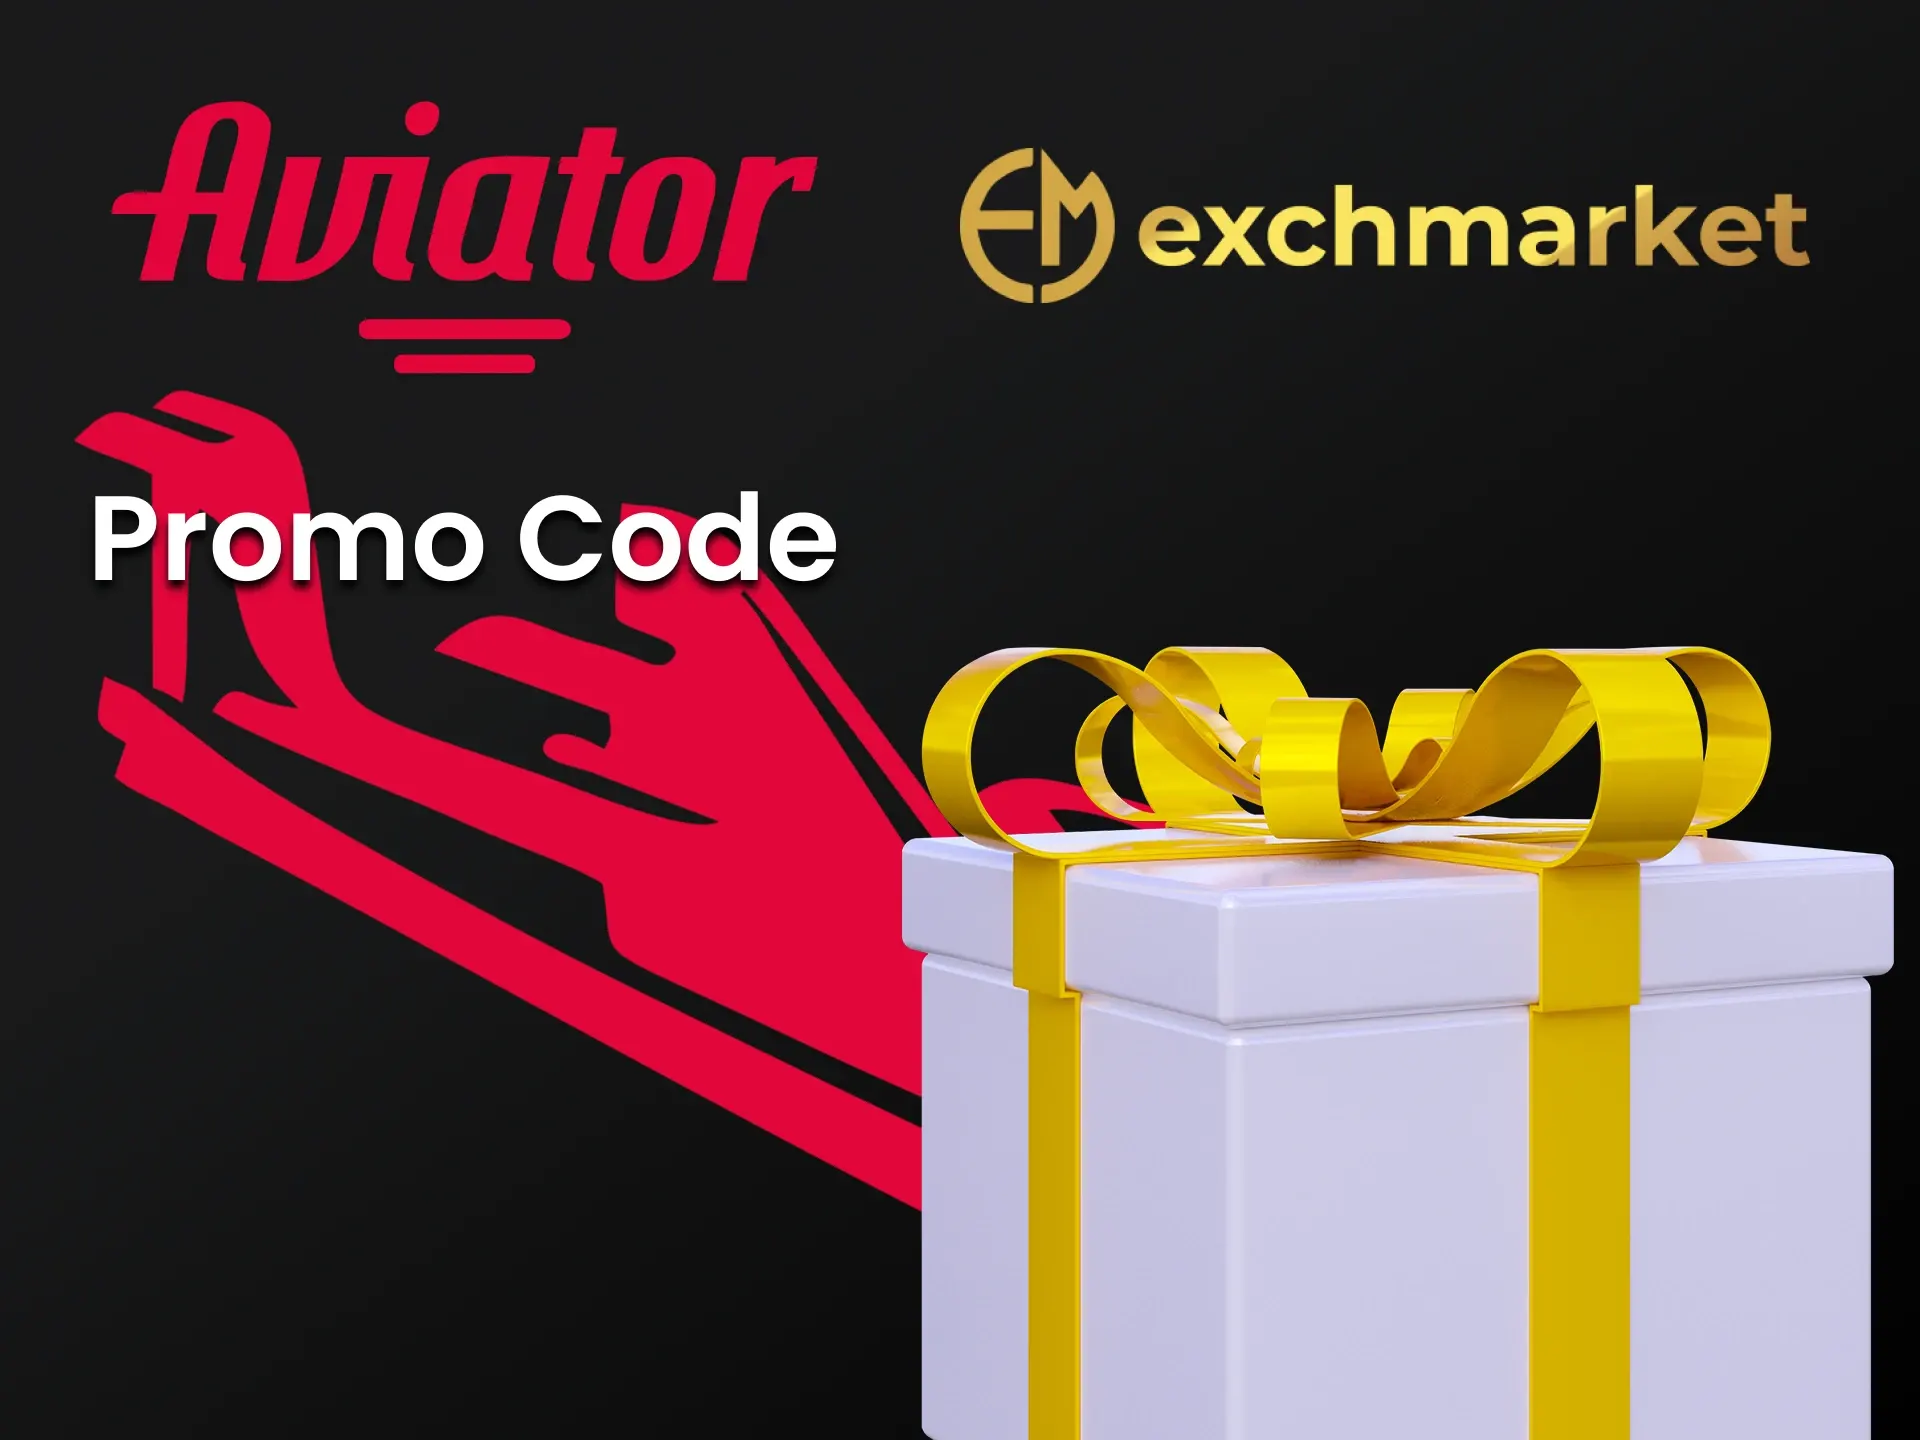 Exchmarket gives a bonus for Aviator.